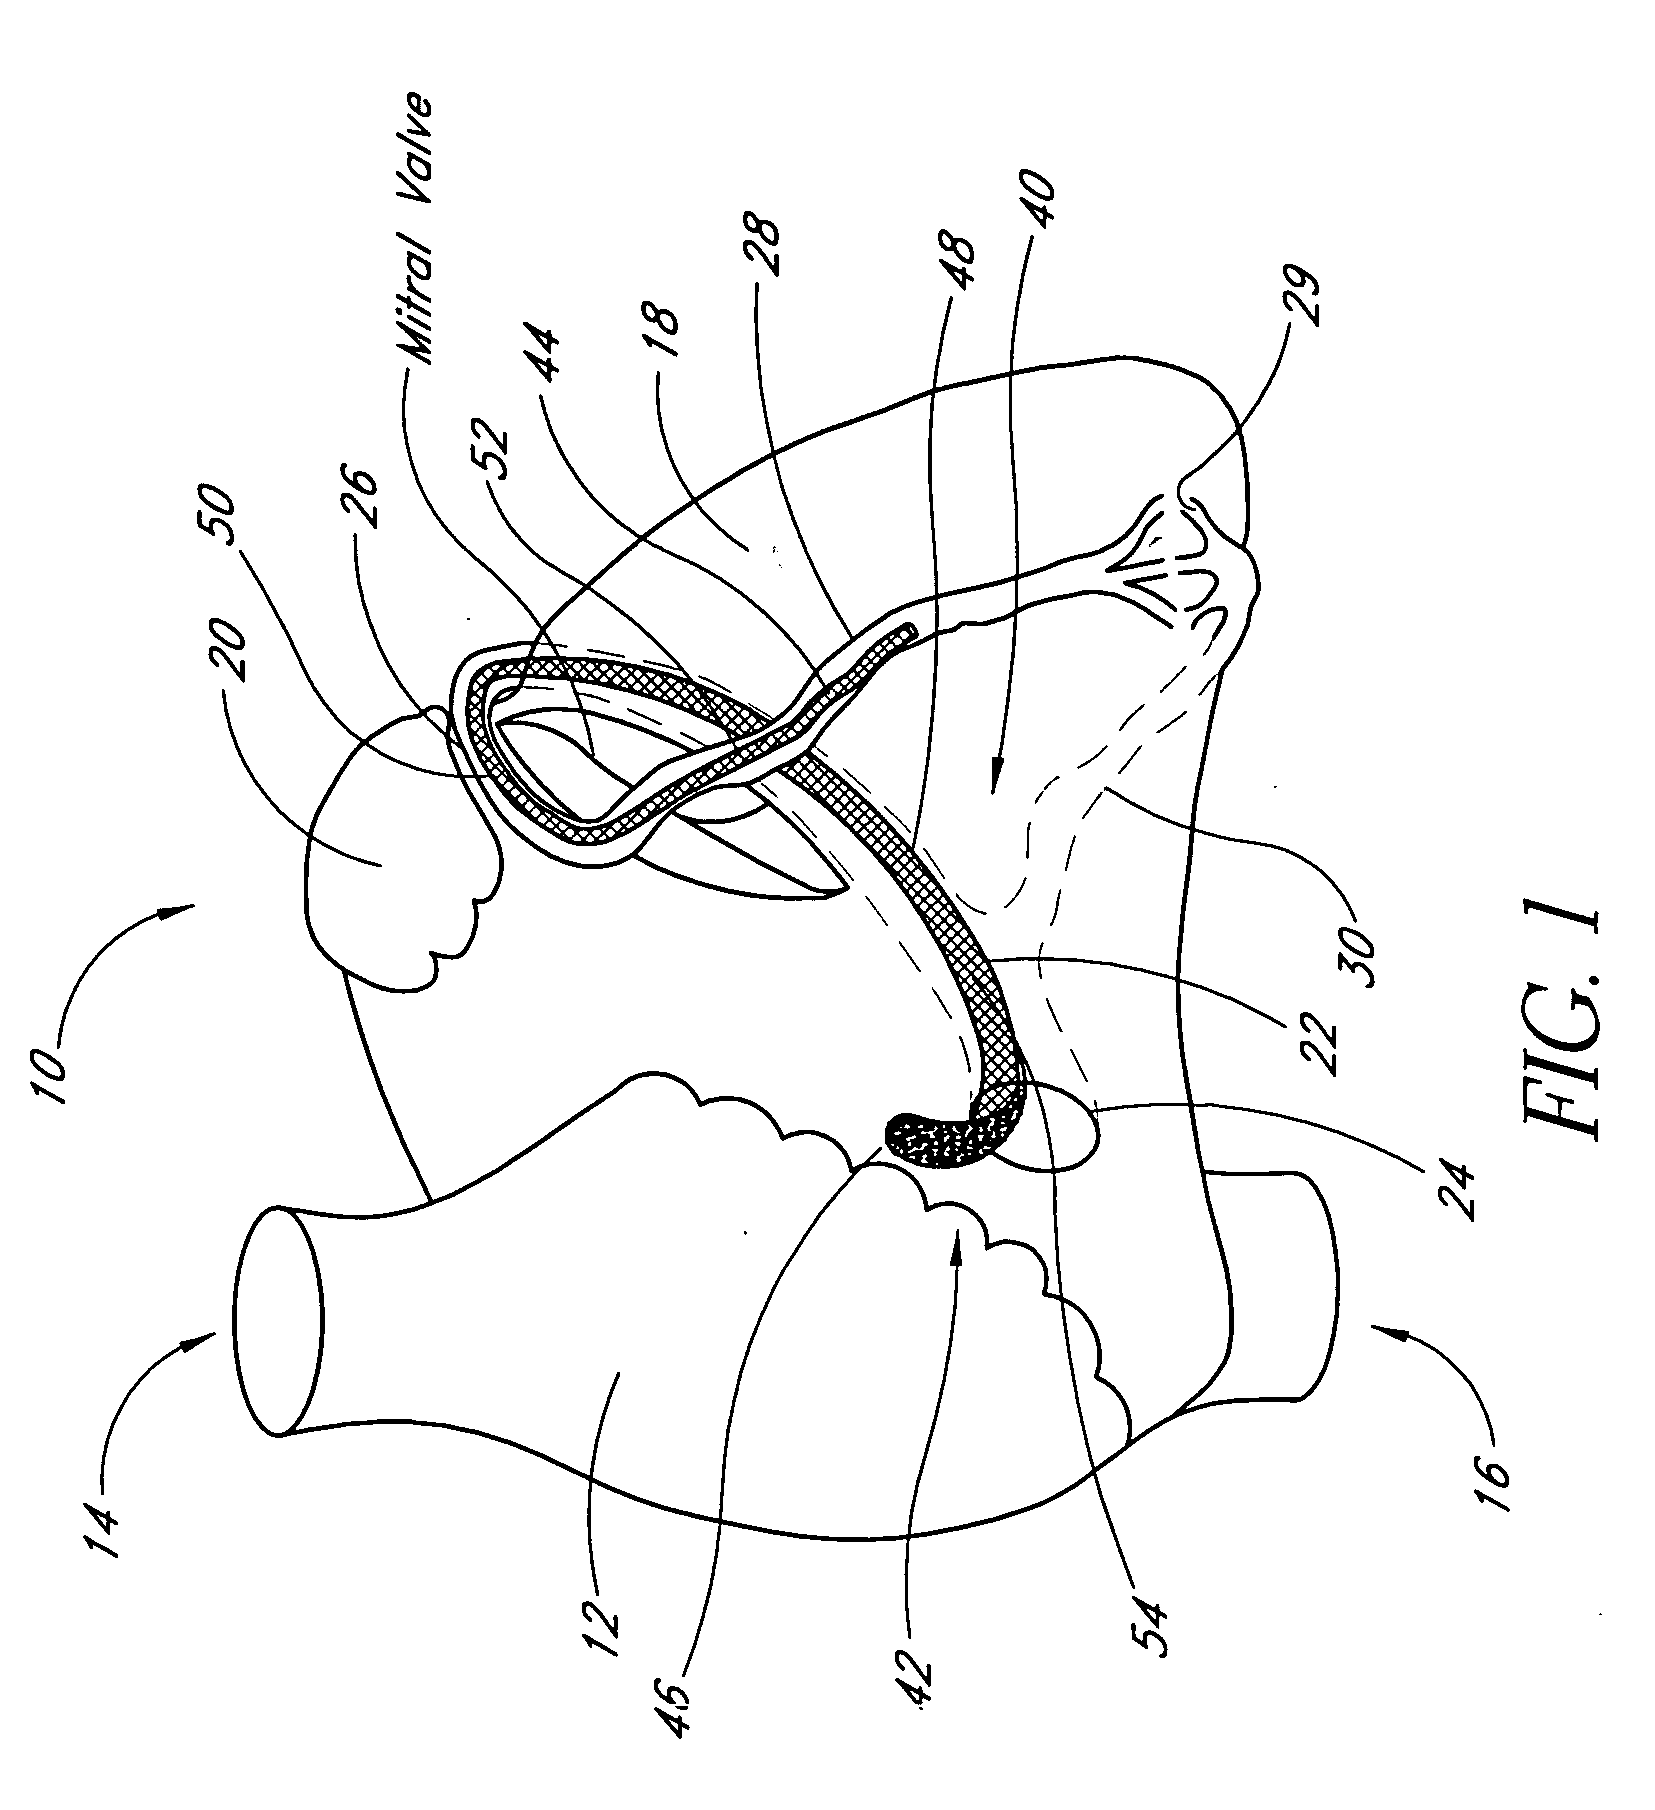 Remotely activated mitral annuloplasty system and methods